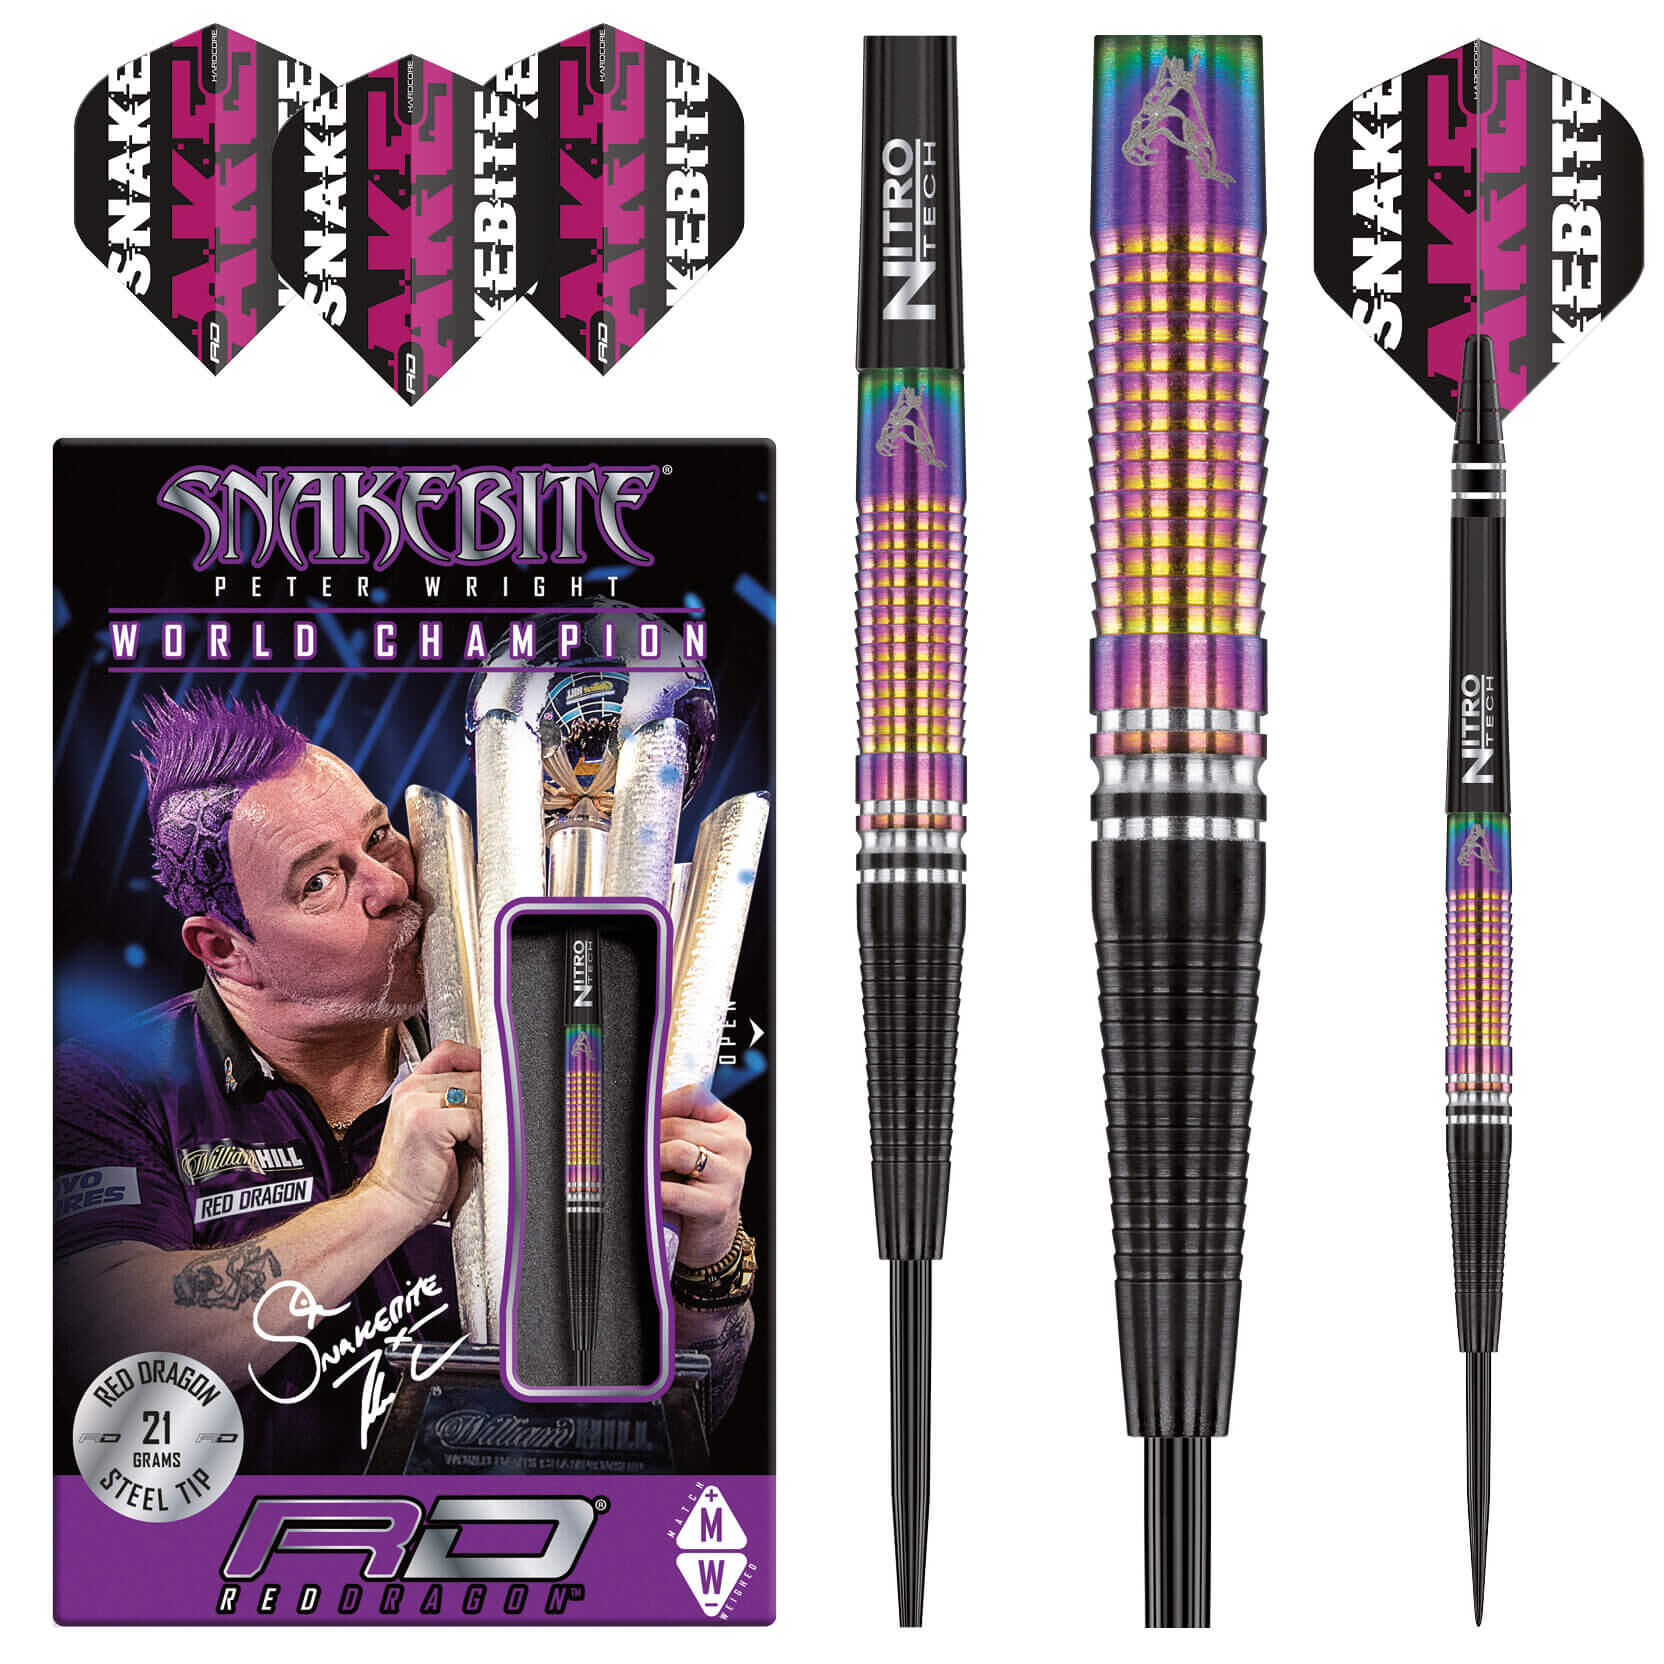 RED DRAGON DARTS Peter Wright Snakebite WC Tapered SE 21g Darts Set including Flights and Shafts